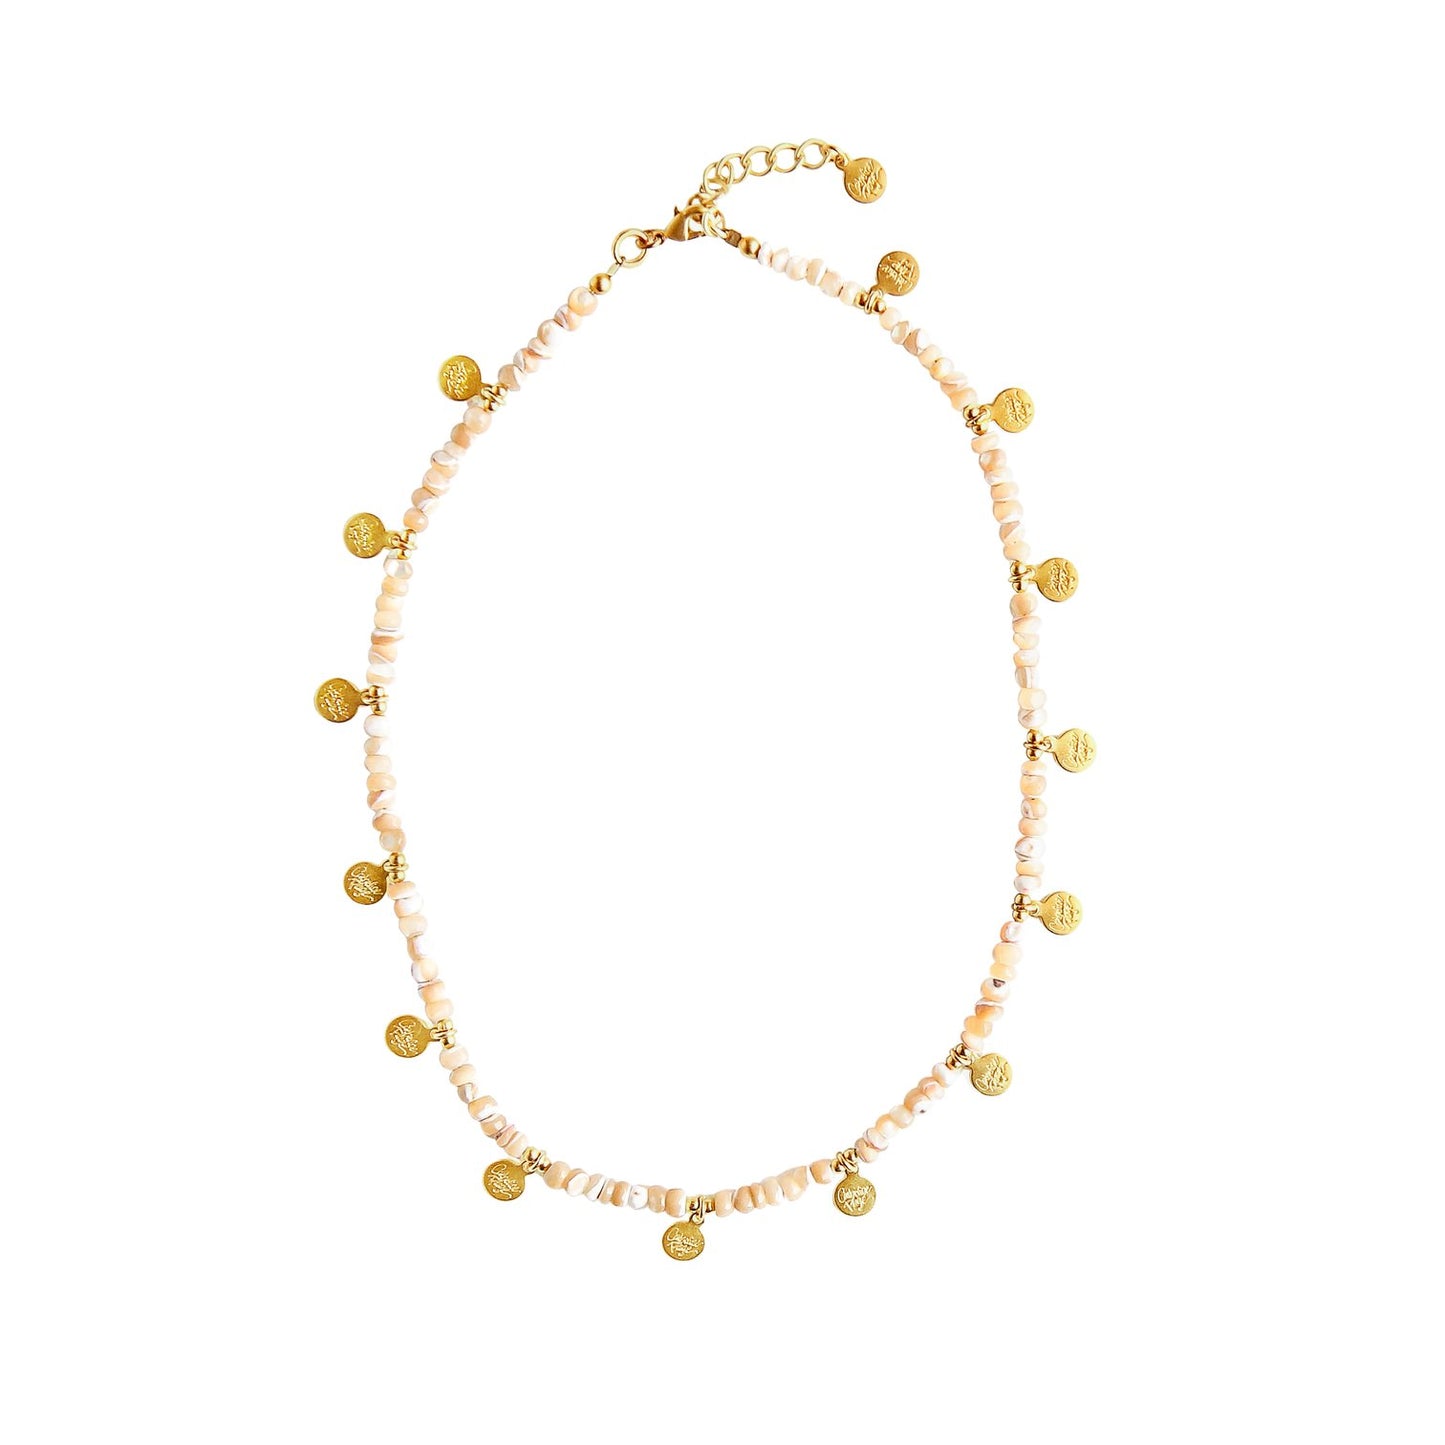 Gold and Gemstone Choker Necklace